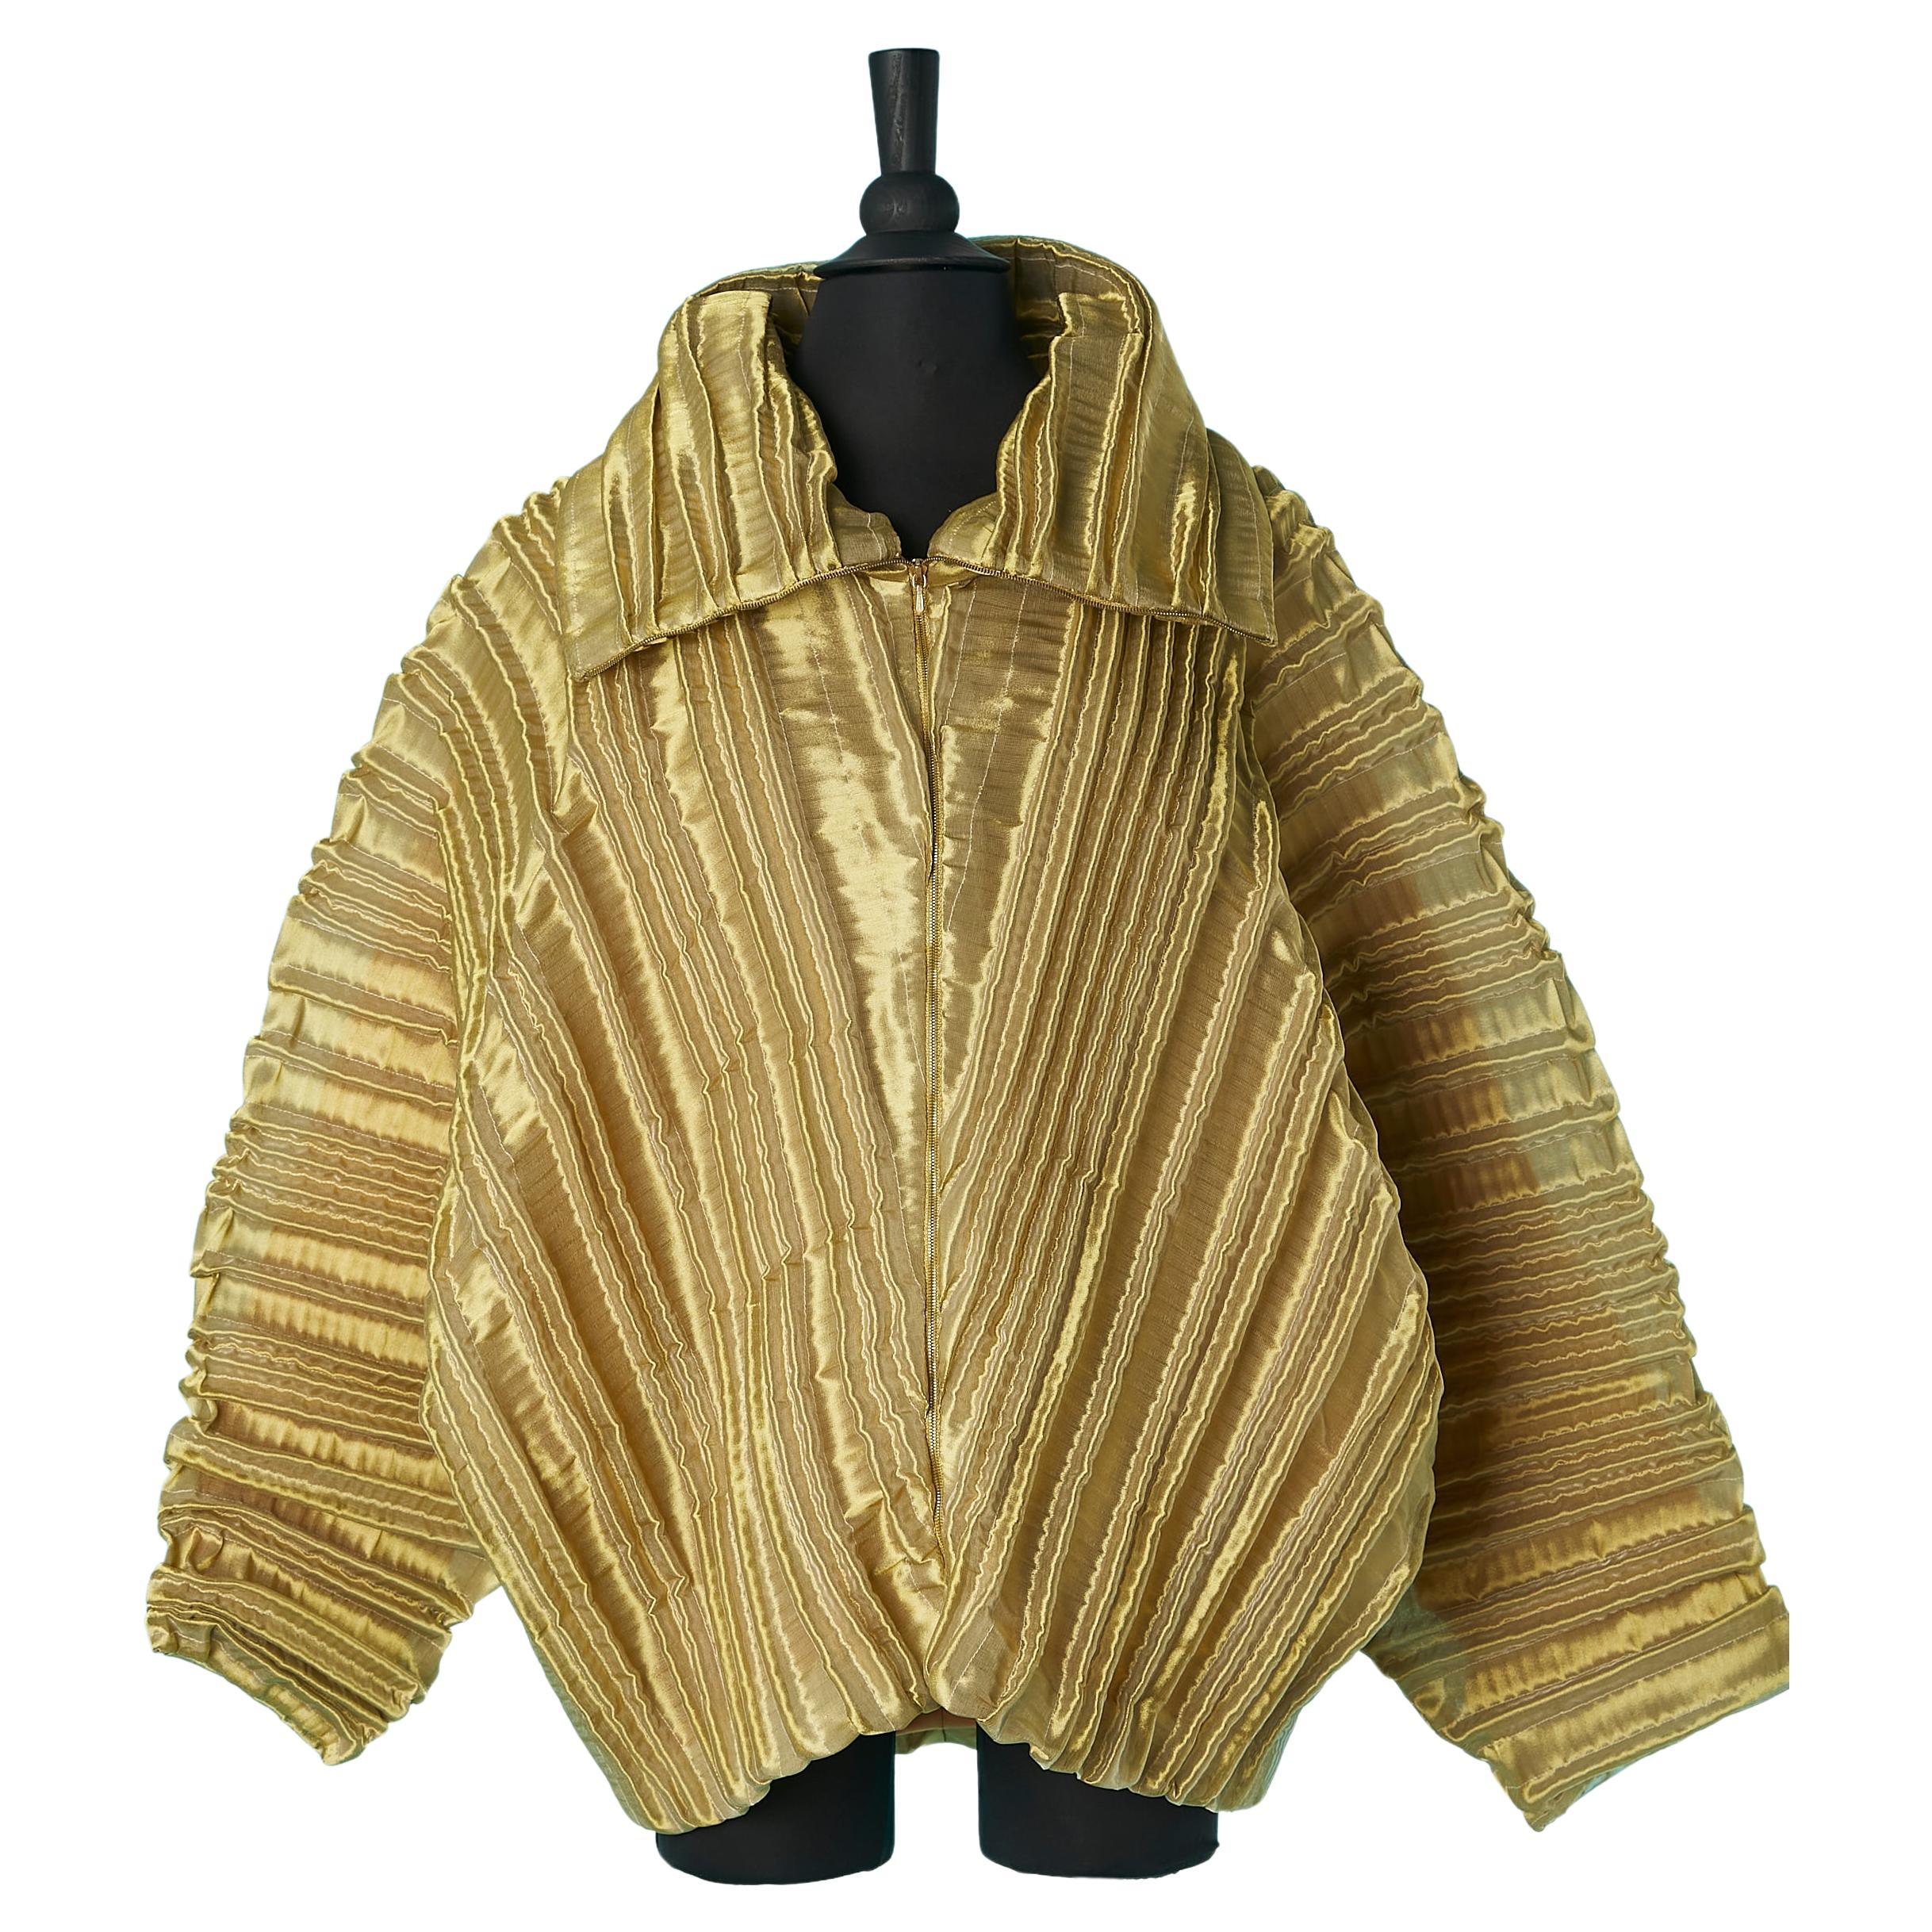 Metallic gold pleated jacket with zip closure in the middle front Paco Rabanne  For Sale